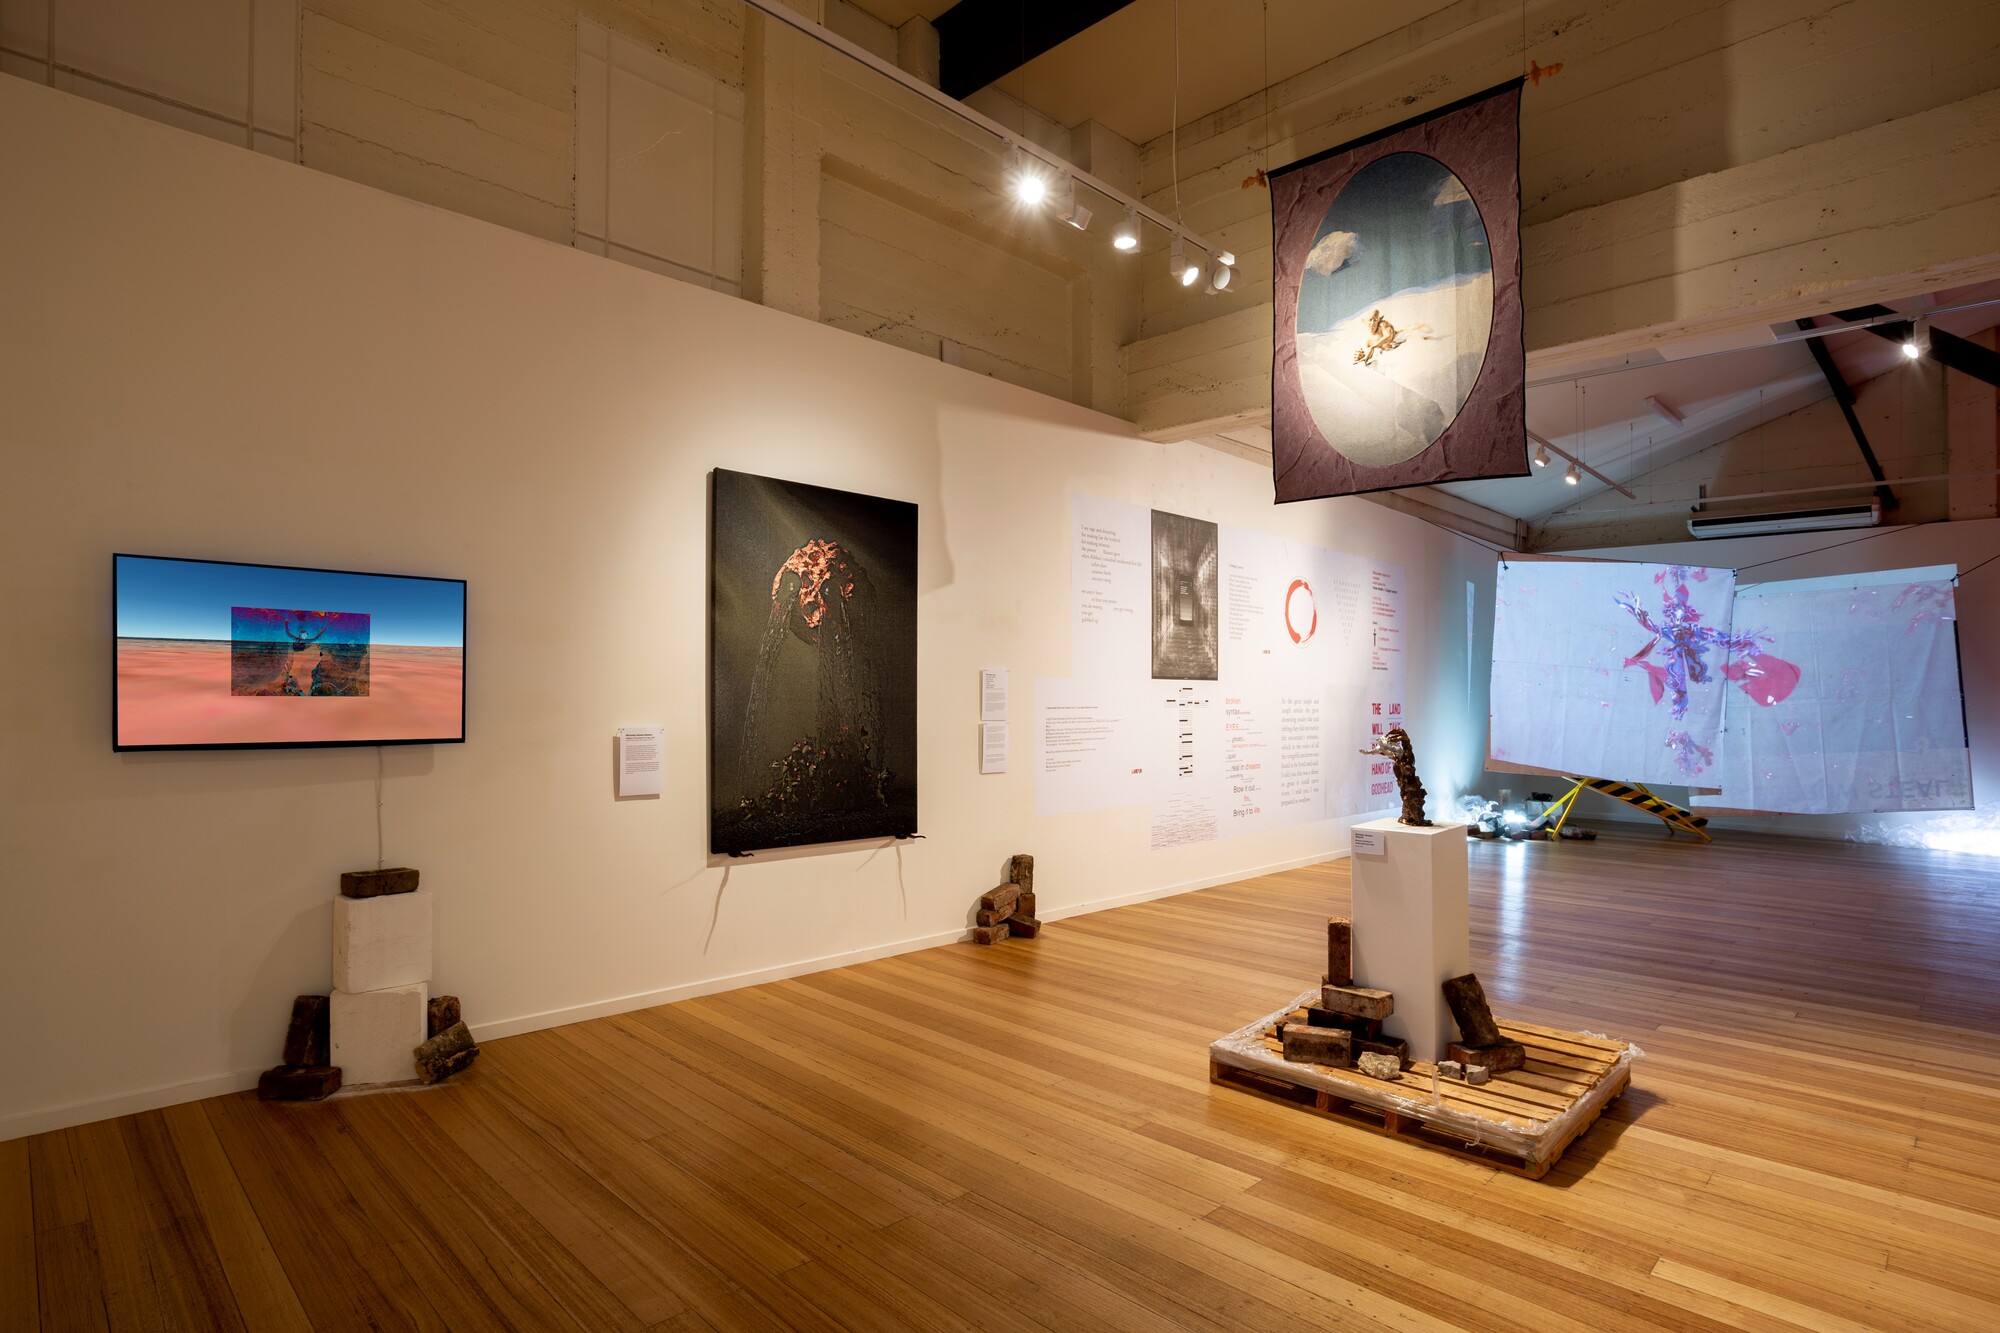 Installation view of <em>Aeon Resurrection</em>, 2022. Jahkarli Romanis, <em>Cache,</em> 2022. Video, 3 mins; Nicholas Aloisio-Shearer, <em>Reject Modernity, Embrace Tradition II: I Have Been In This Place Before,</em> 2021. Jacquard woven tapestry, silicon, pigment, aluminium, resin and bronze pigment; Nicholas Aloisio-Shearer, Allegory of the Death of Cringe, 2021. Jacquard woven tapestry, silicon, pigment and aluminium; Huntrezz Janos, <em>video,</em> 2022. 3D video animation. Courtesy the gallery. Photo: Lucy Foster